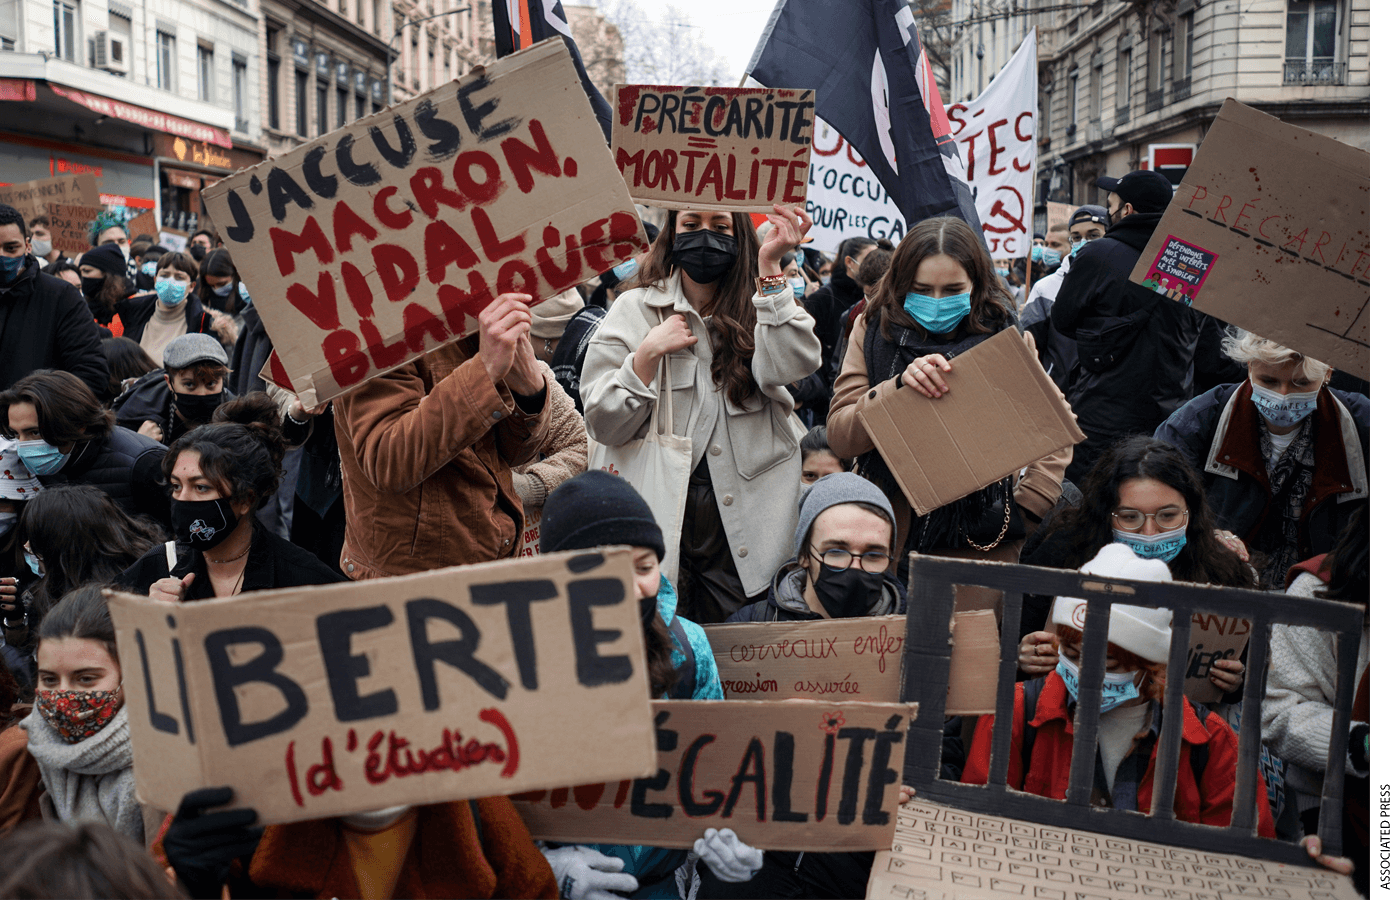 Students hold banners during a demonstration to demand support for workers, in Lyon, central France, Tuesday, Jan. 26, 2021.